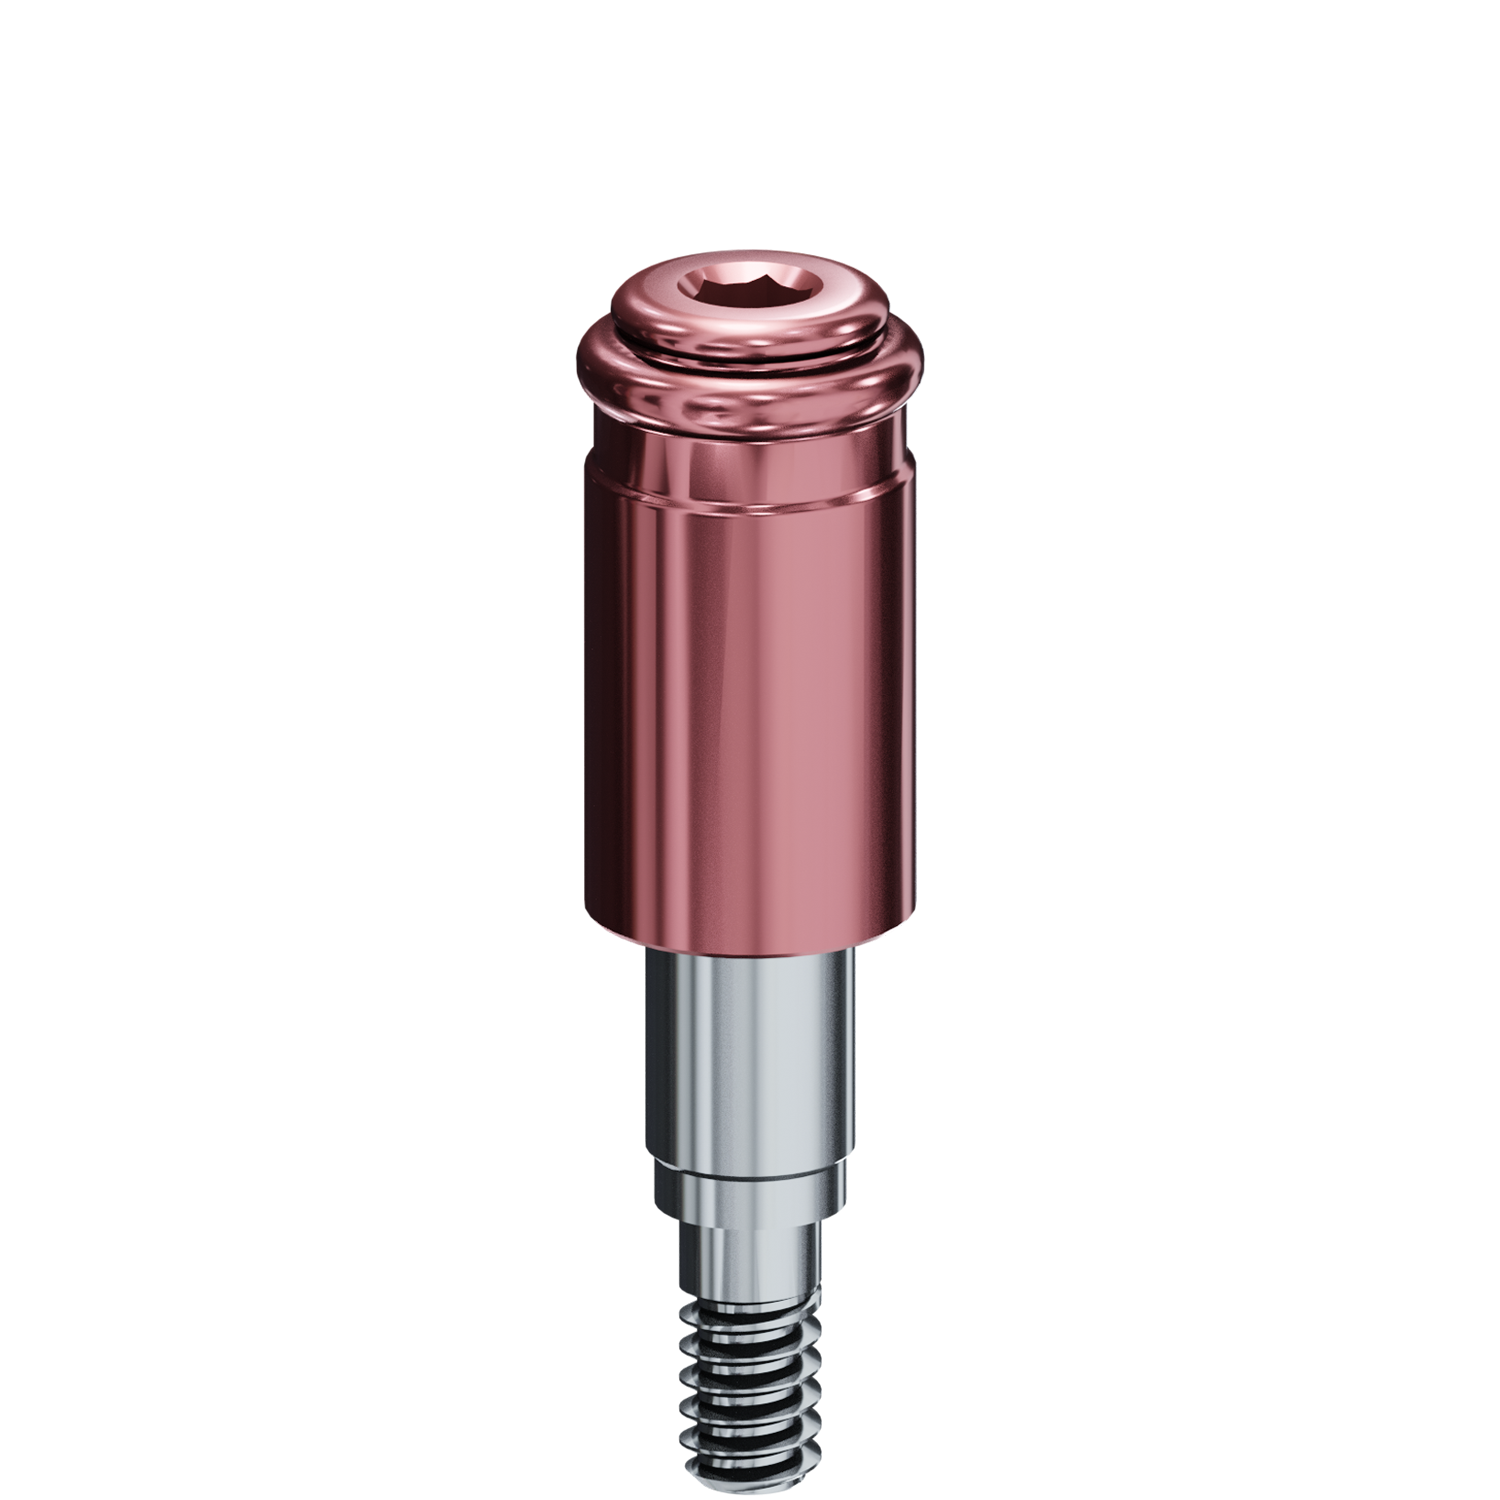 R-Tx Attachment System - 3.4mm Biomet 3i® Certain Connection - 048" Drive - 5.0mm